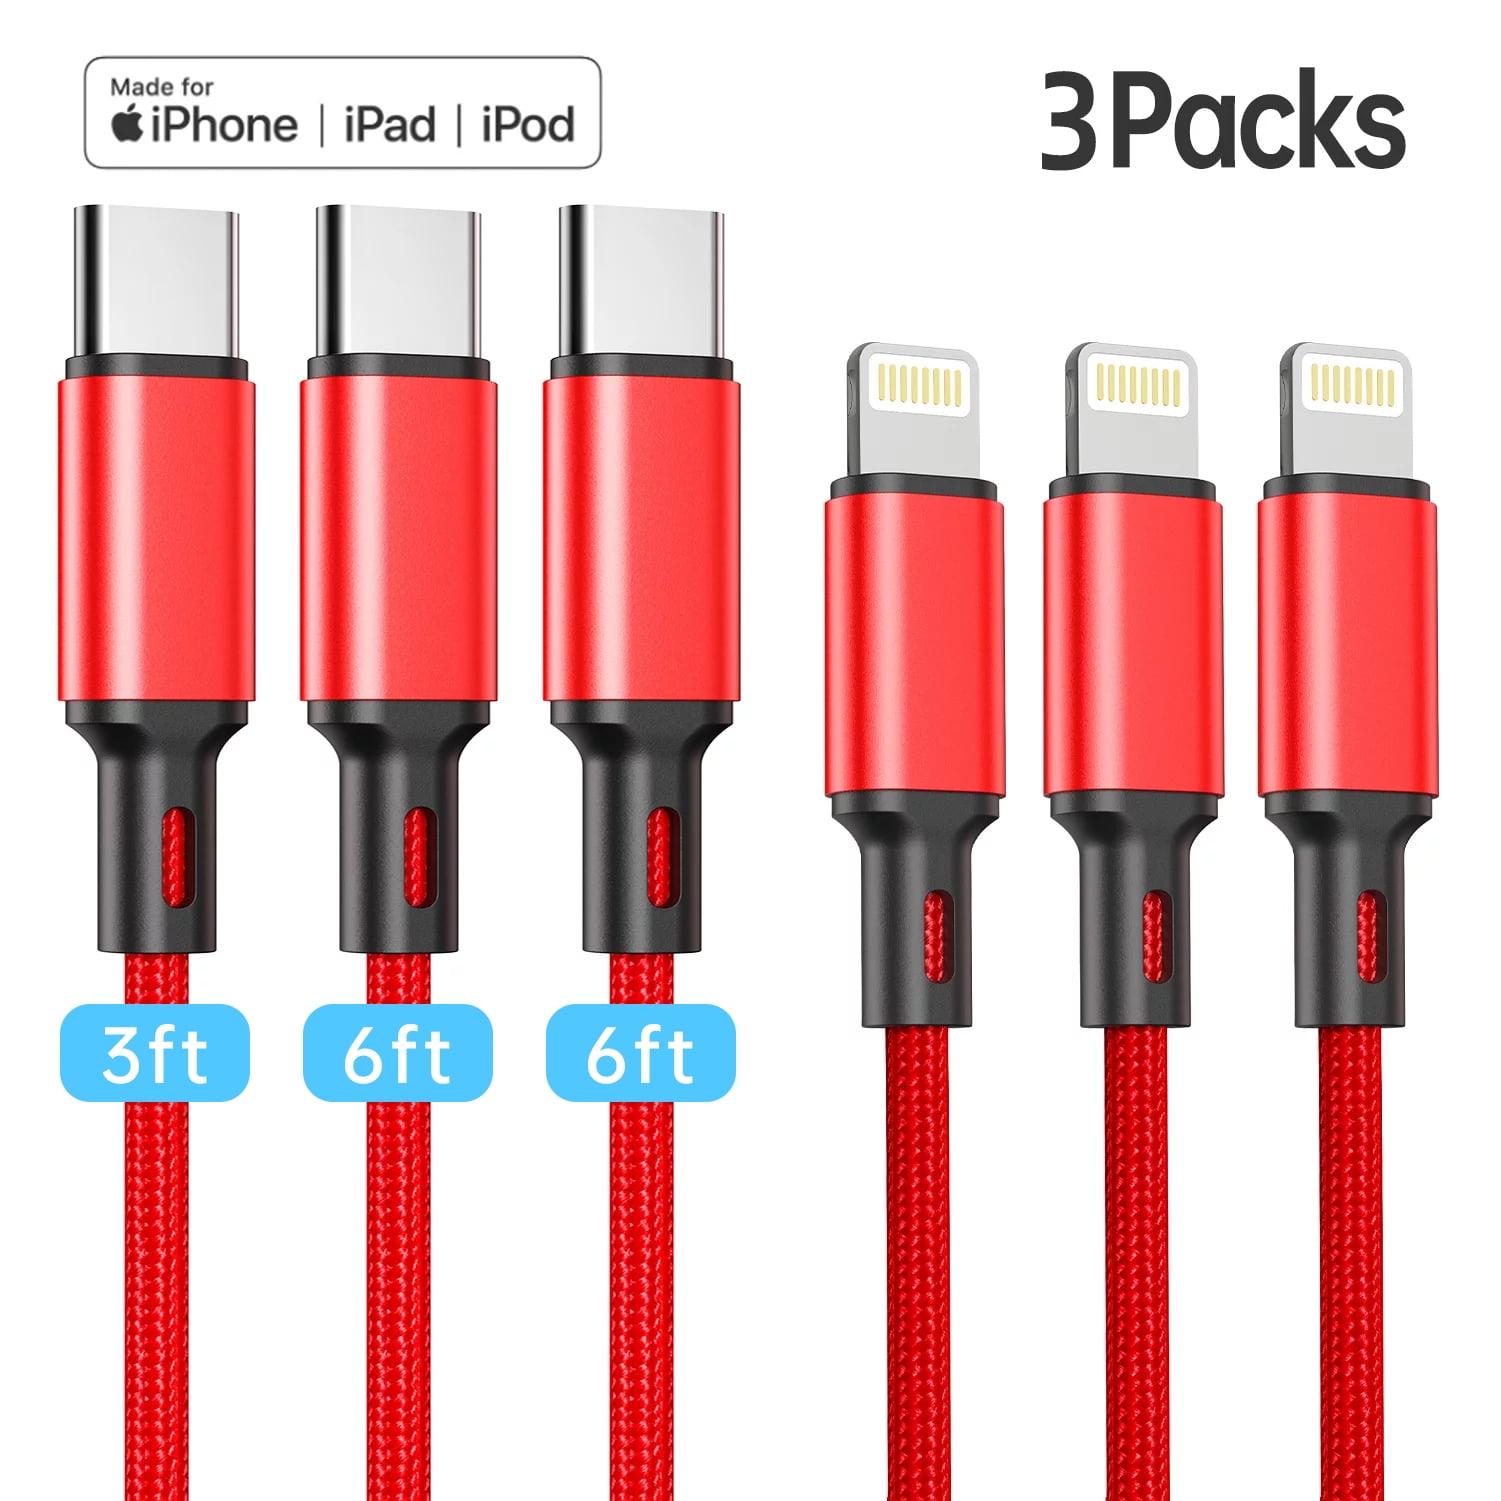 USB - Lightning cable, Made for iPhone (MFi)